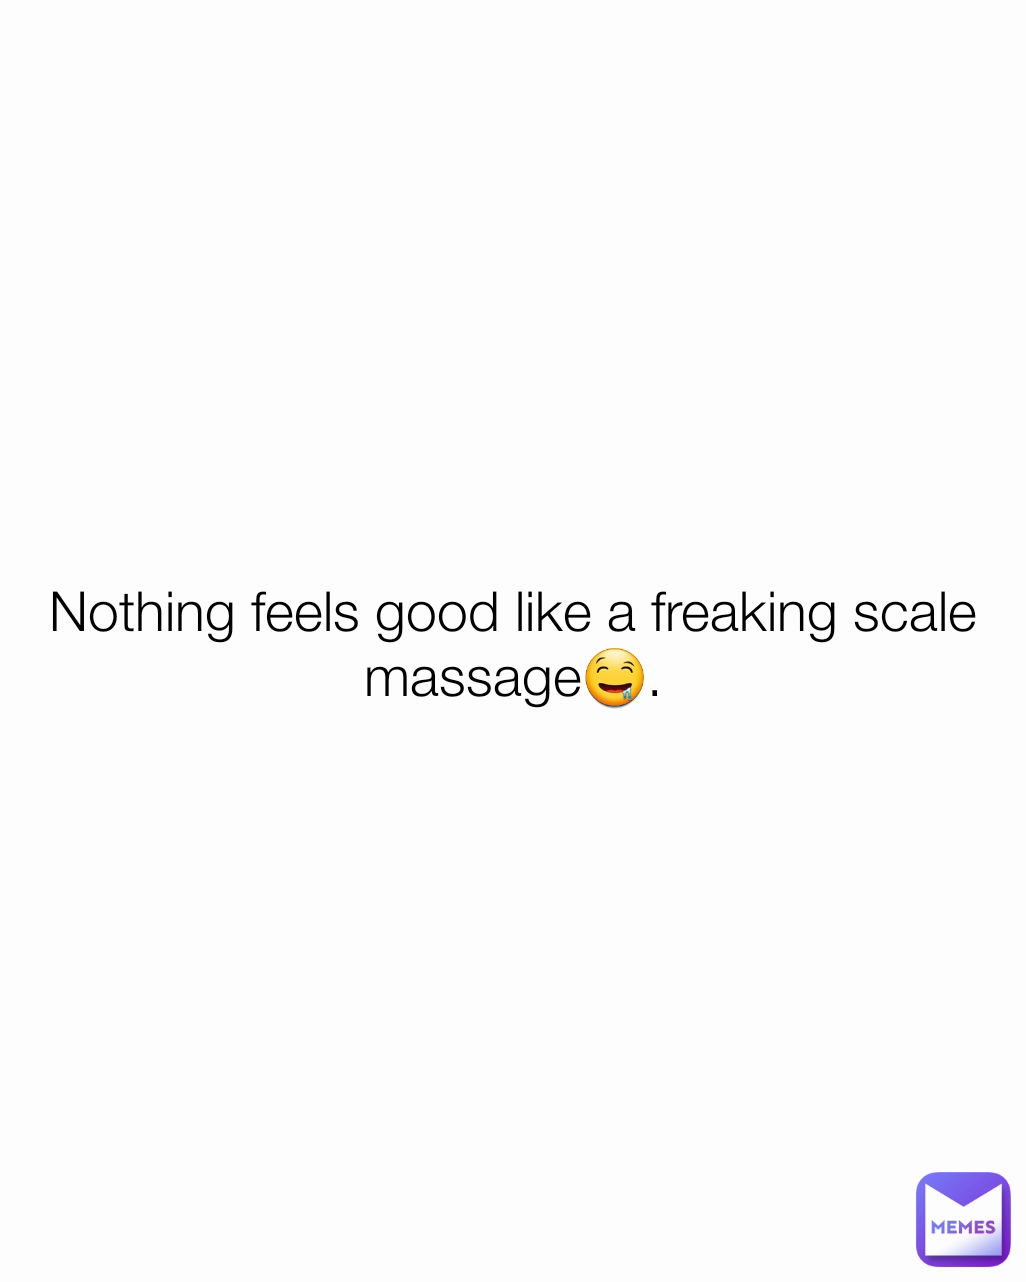 Nothing feels good like a freaking scale massage🤤.